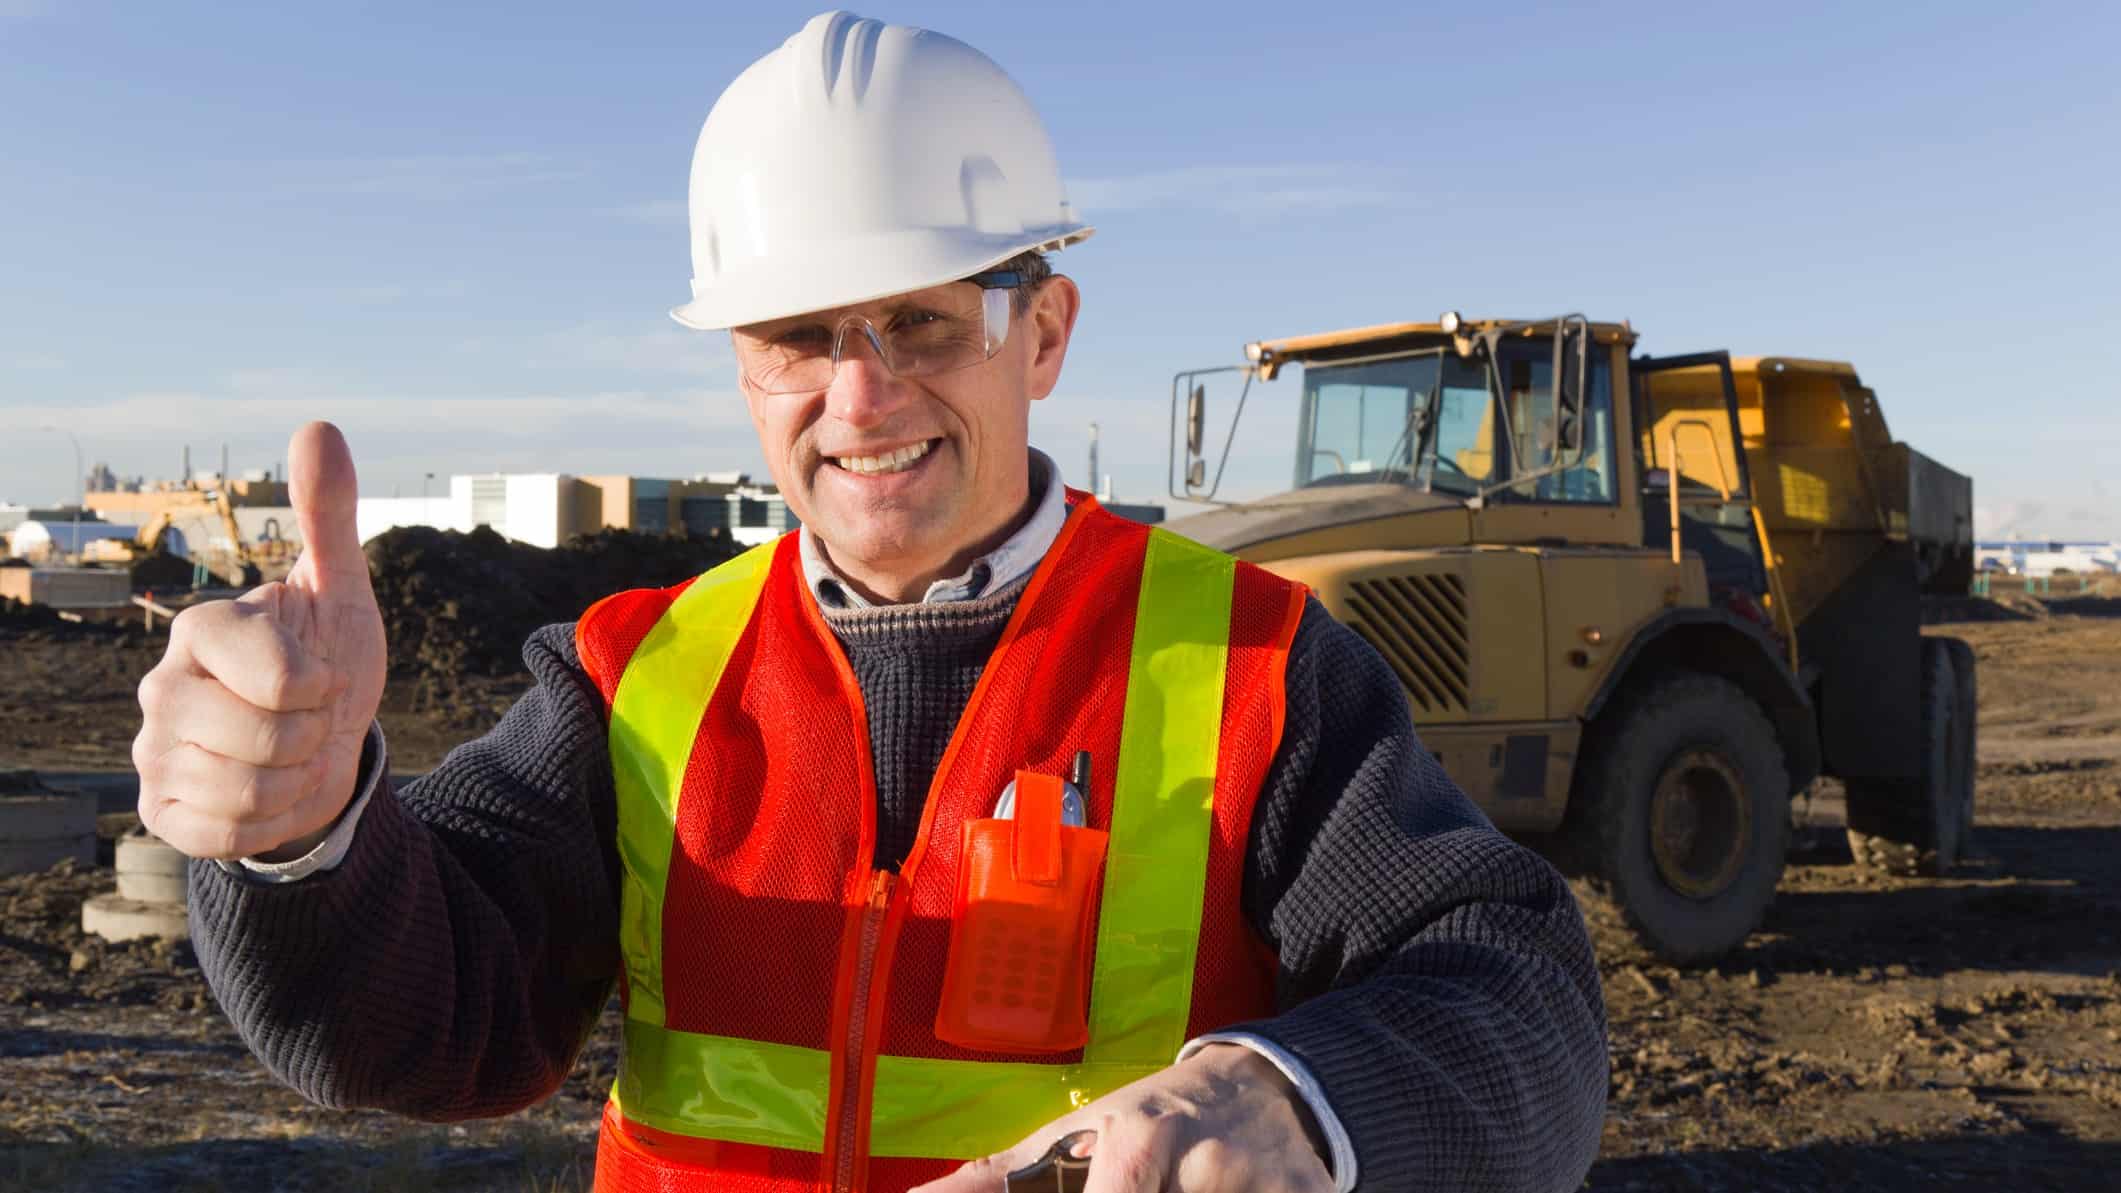 a man in a high visibility vest and hard hat holds a thumbs up at a mine site with heavy equipment in the background.